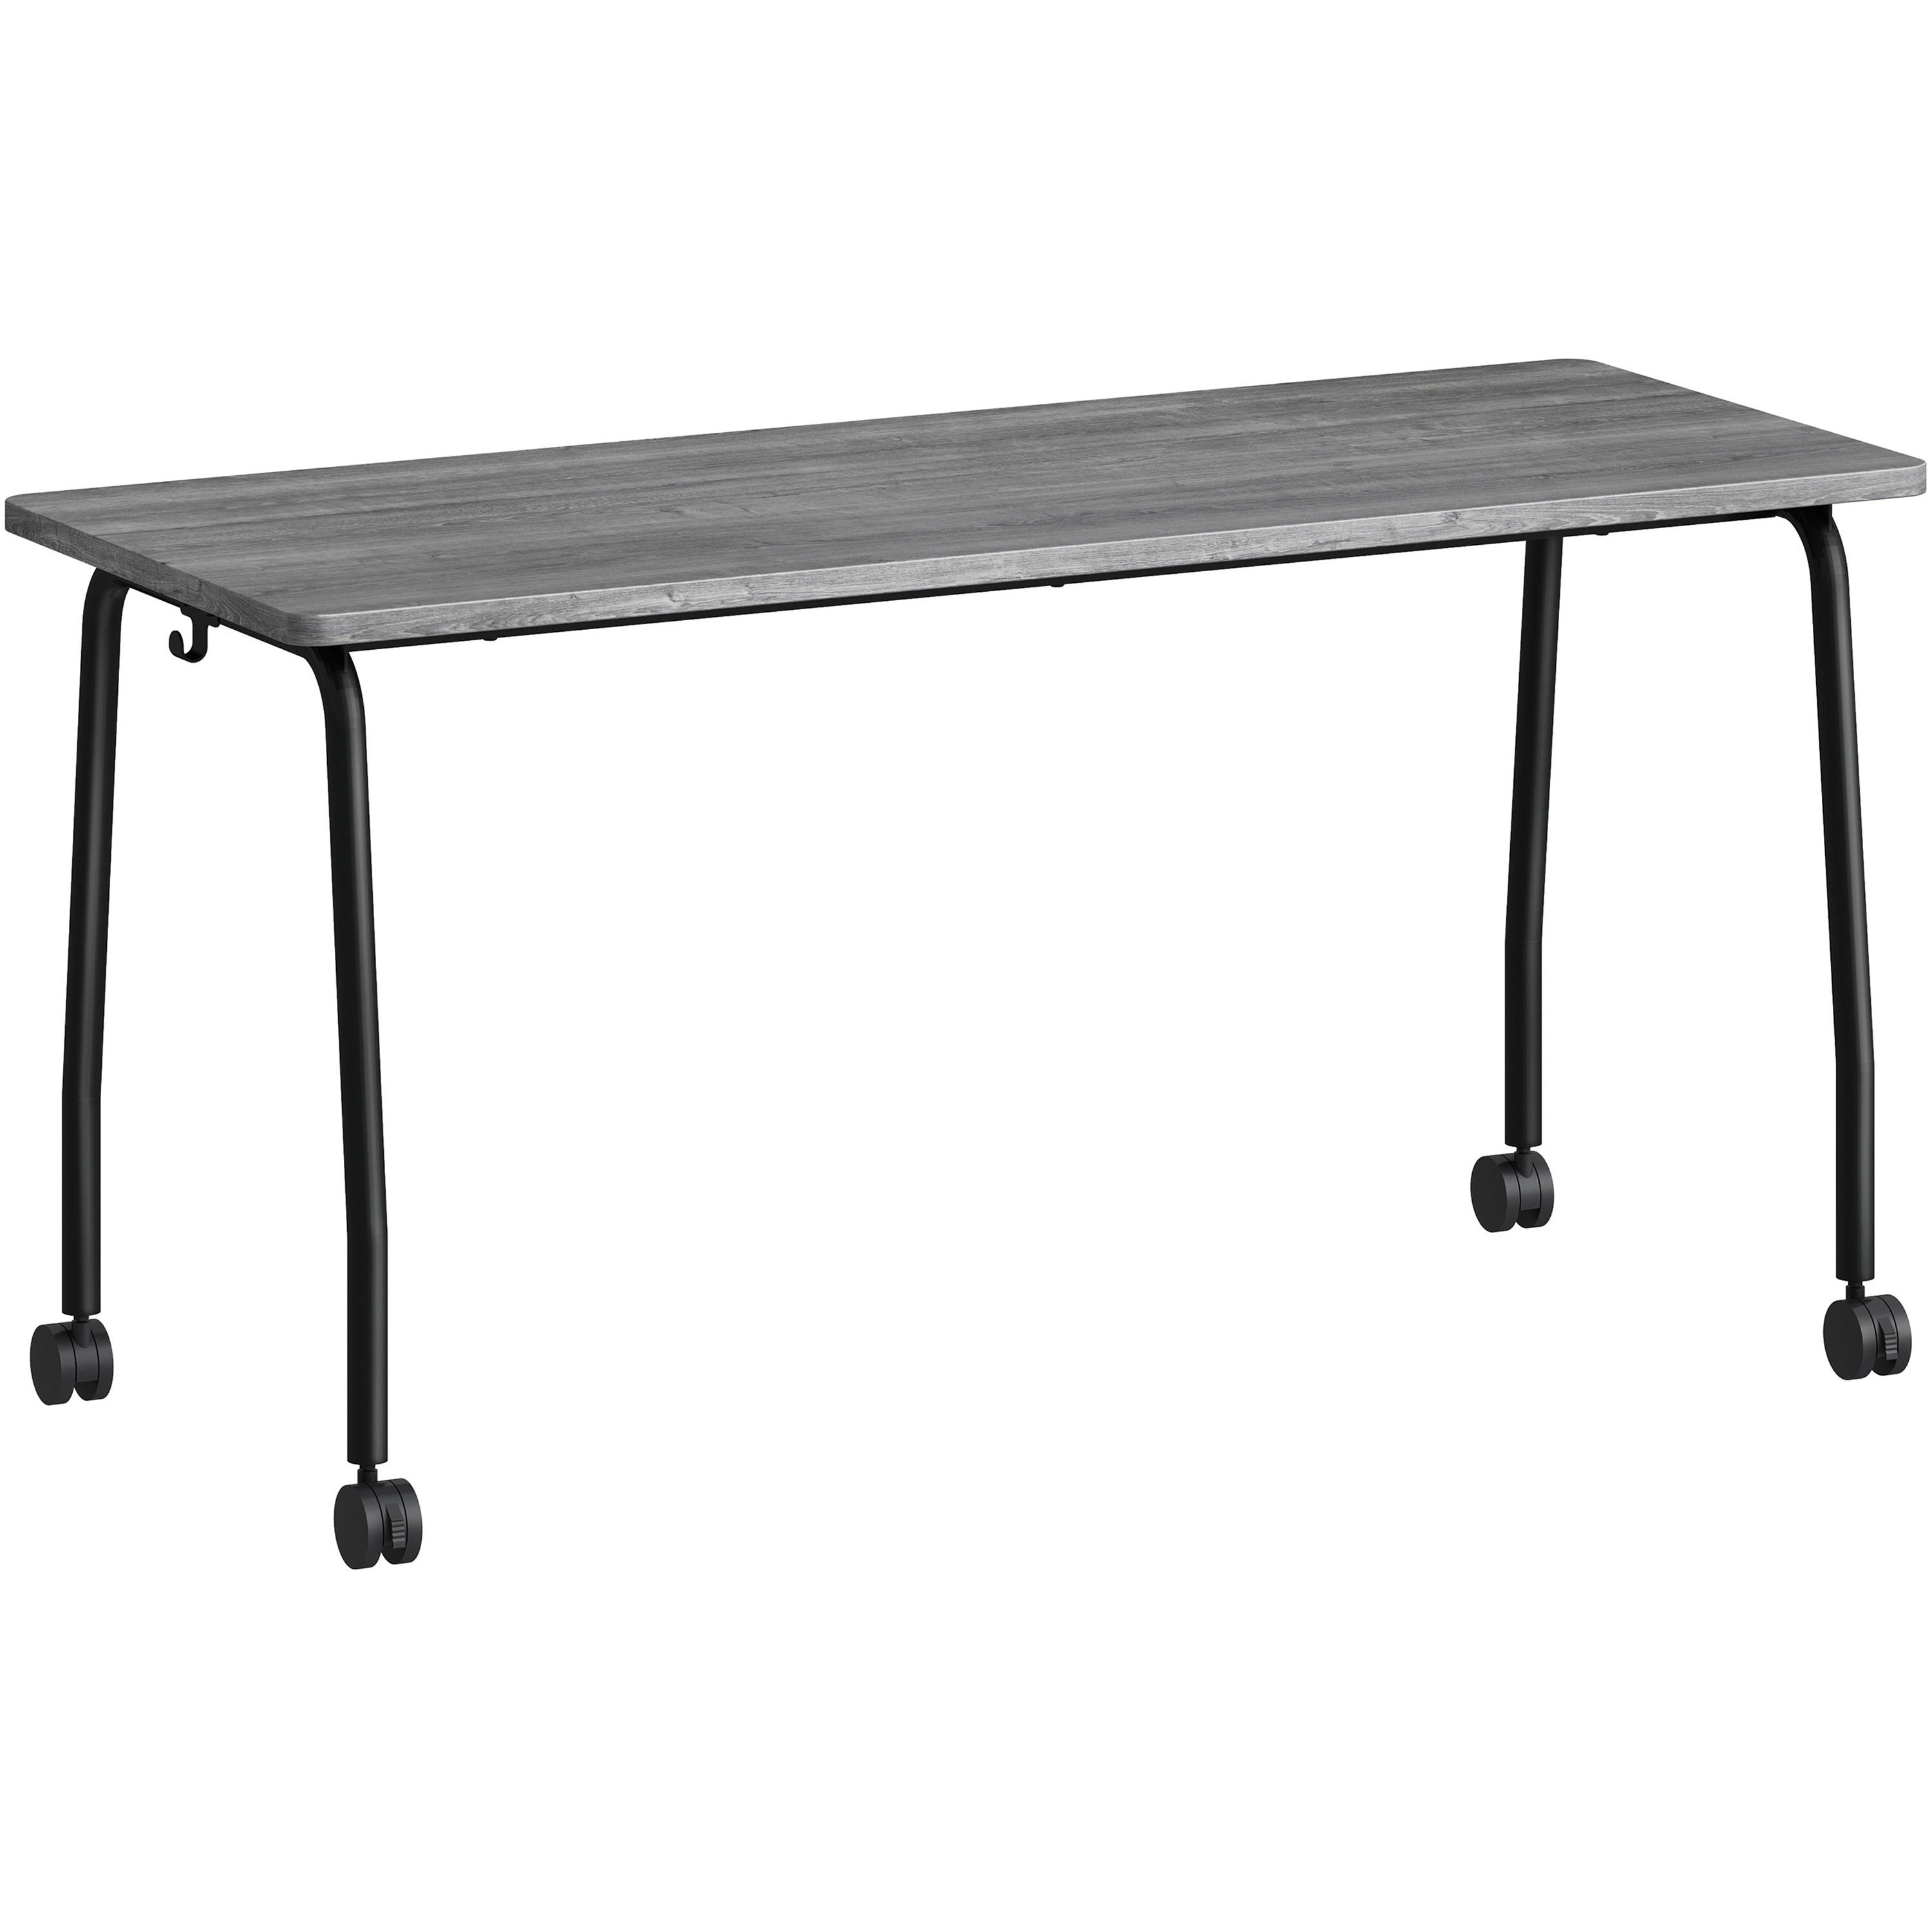 lorell-training-table-for-table-toplaminated-top-300-lb-capacity-2950-table-top-length-x-2363-table-top-width-x-1-table-top-thickness-59-height-assembly-required-weathered-charcoal-particleboard-top-material-1-each_llr60846 - 1